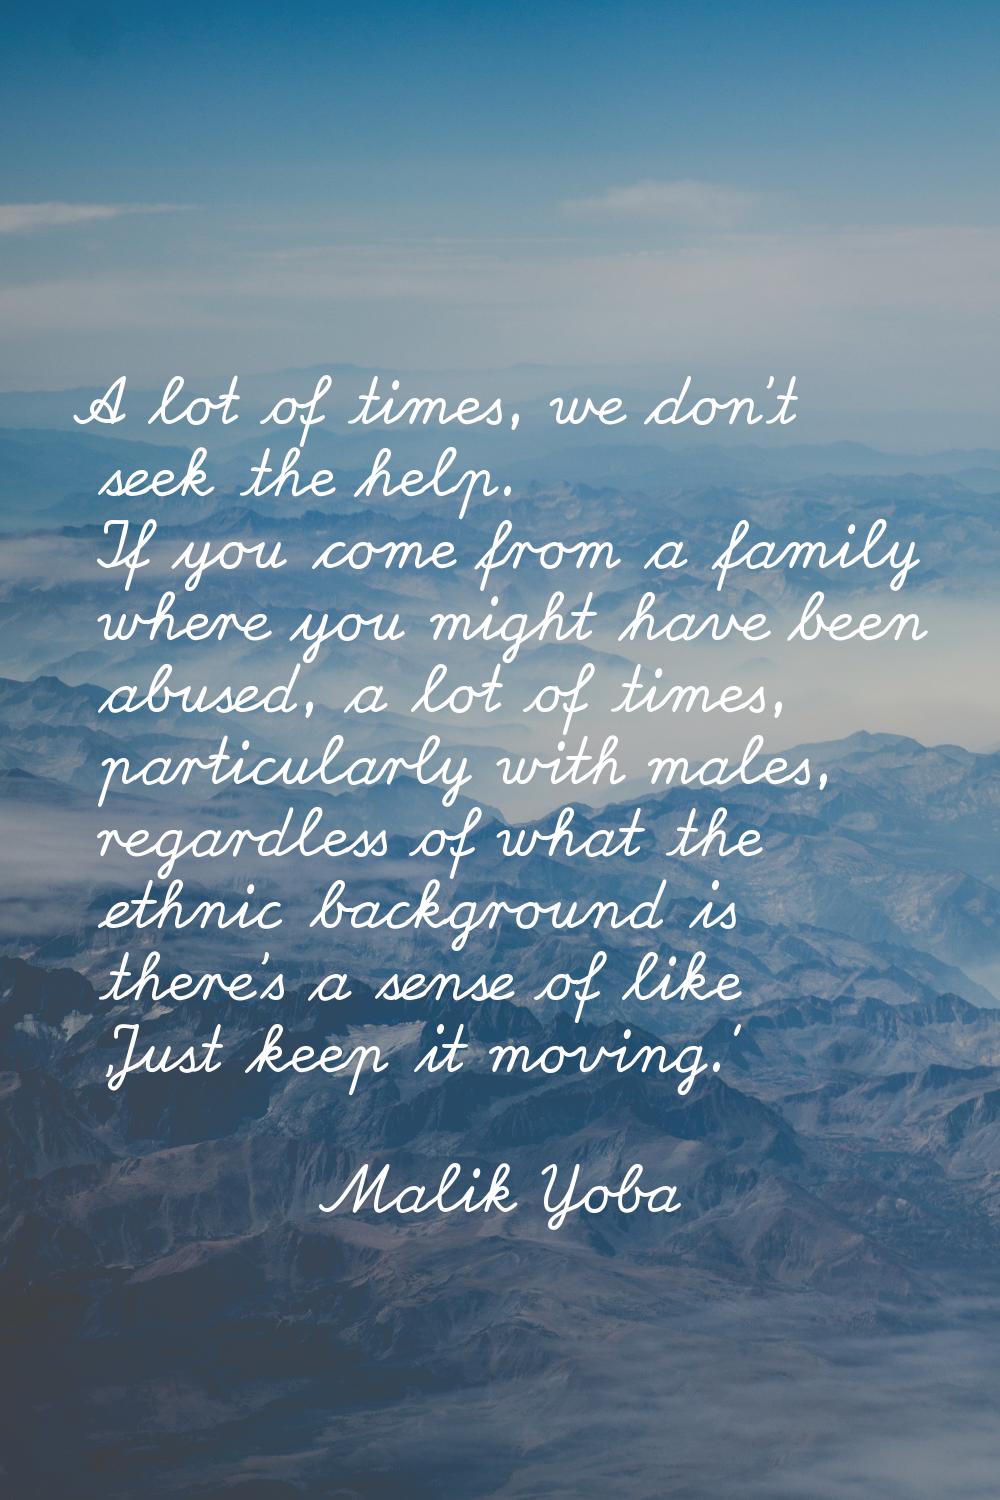 A lot of times, we don't seek the help. If you come from a family where you might have been abused,